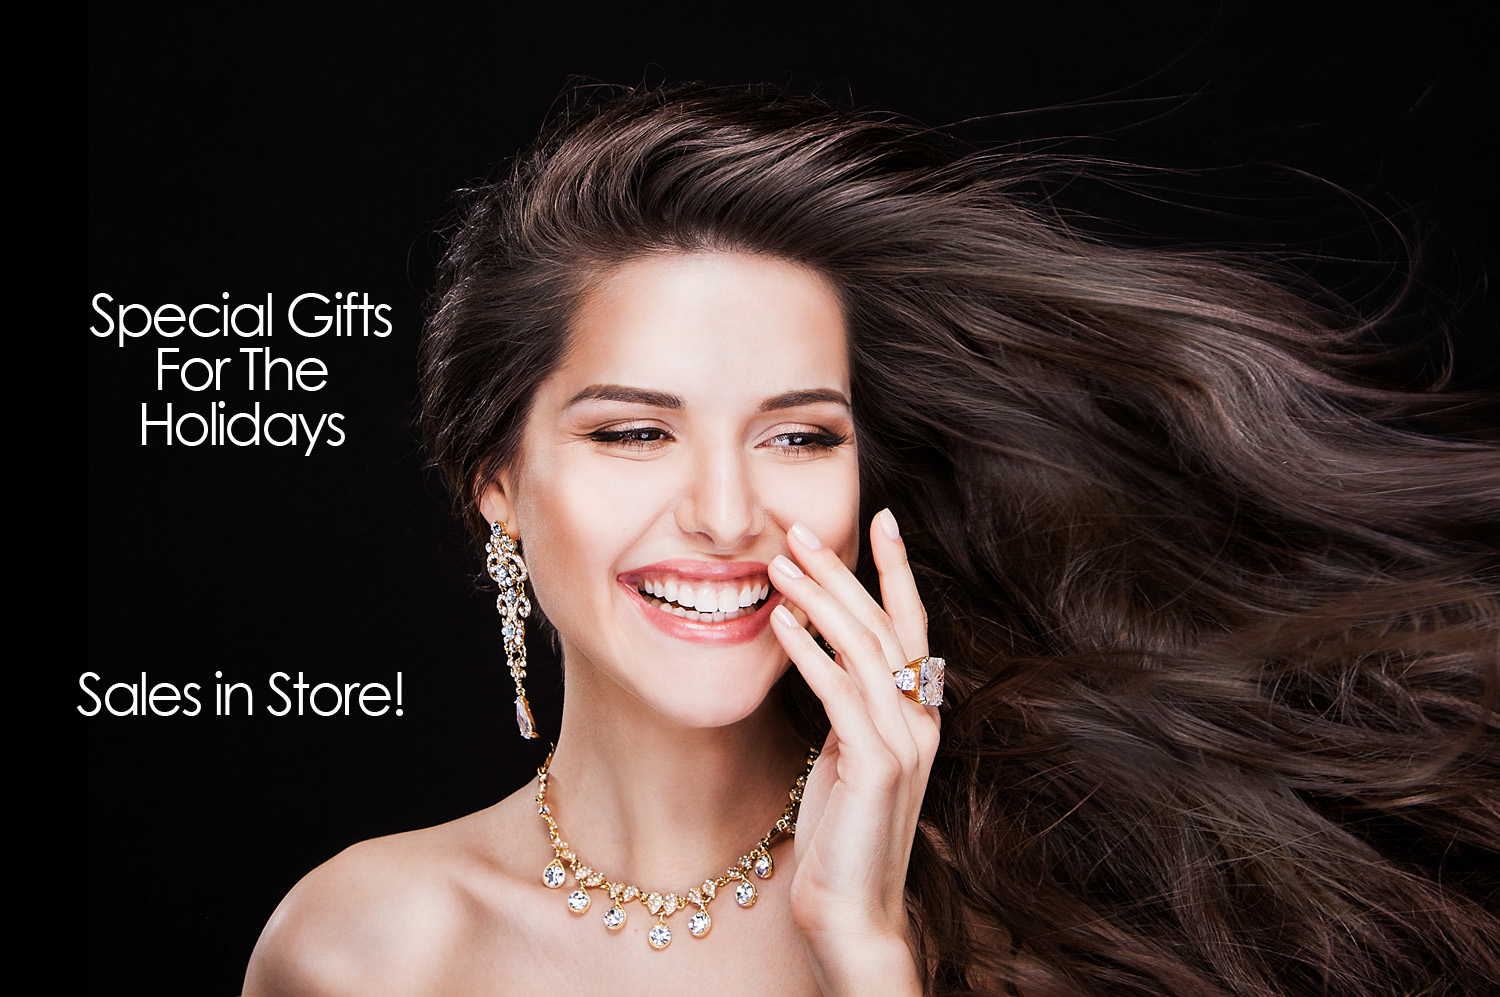 Gifts For Holidays Sales Jewelry Atlanta